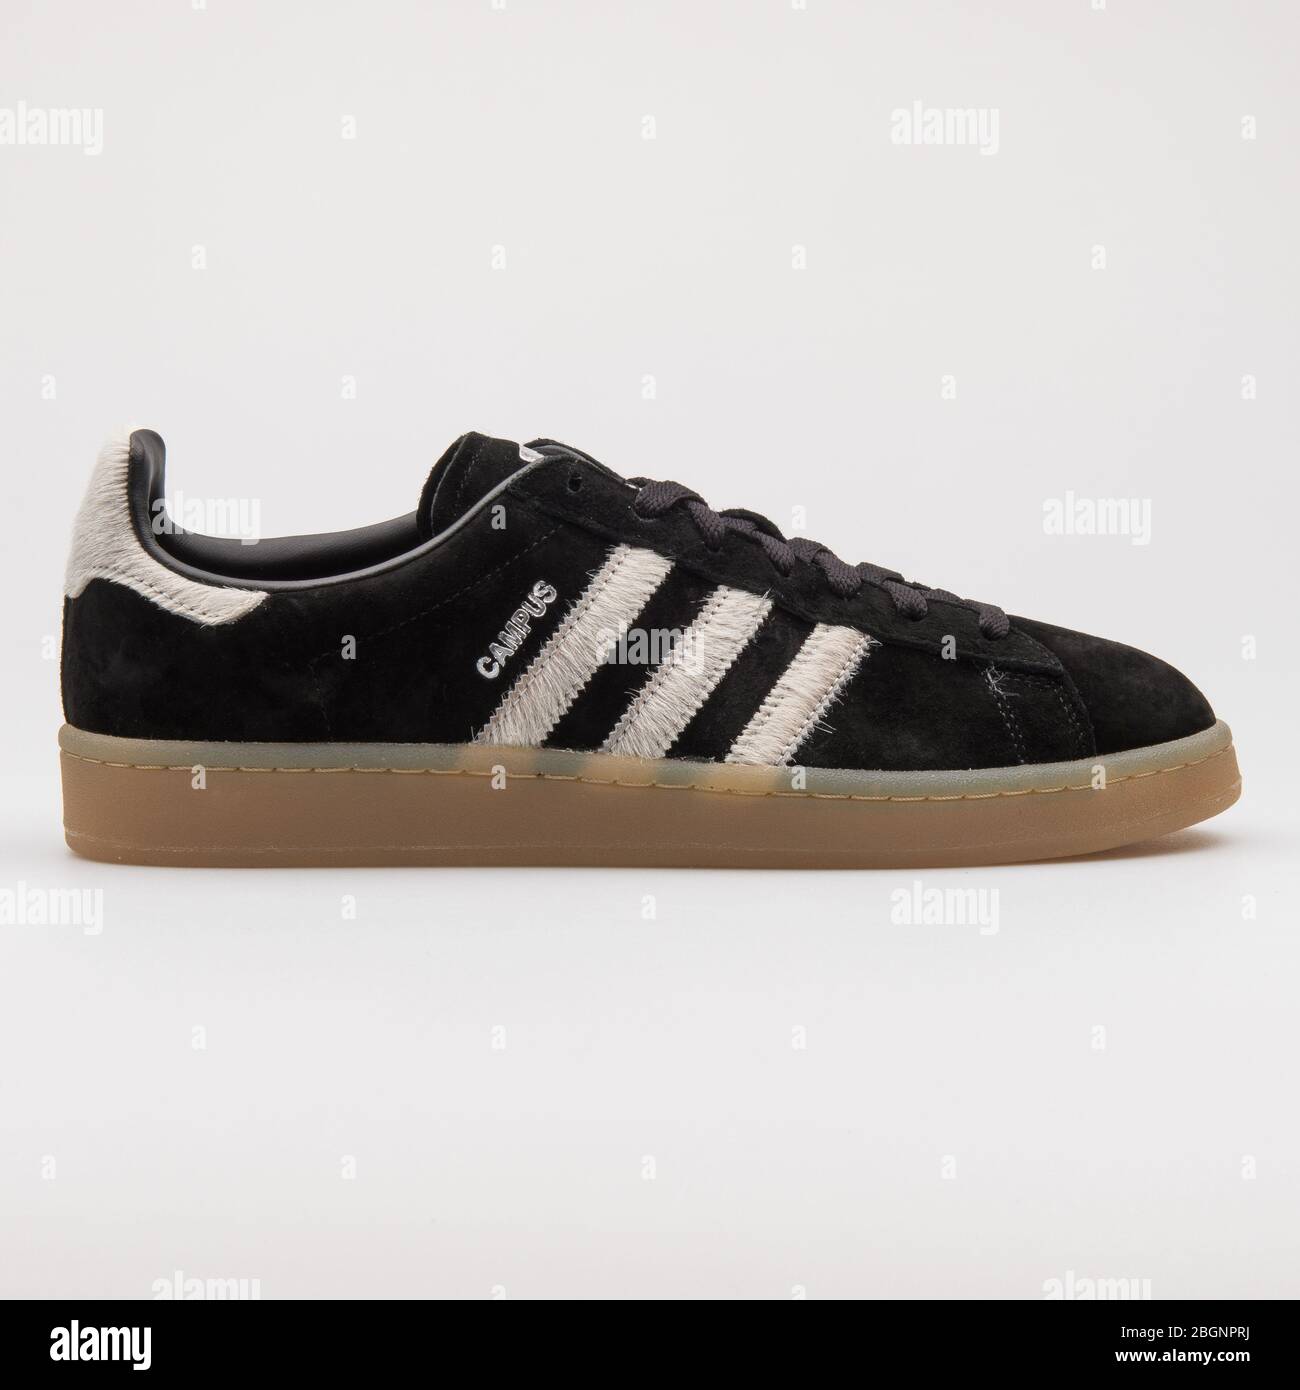 Adidas Campus black sneaker with pony 